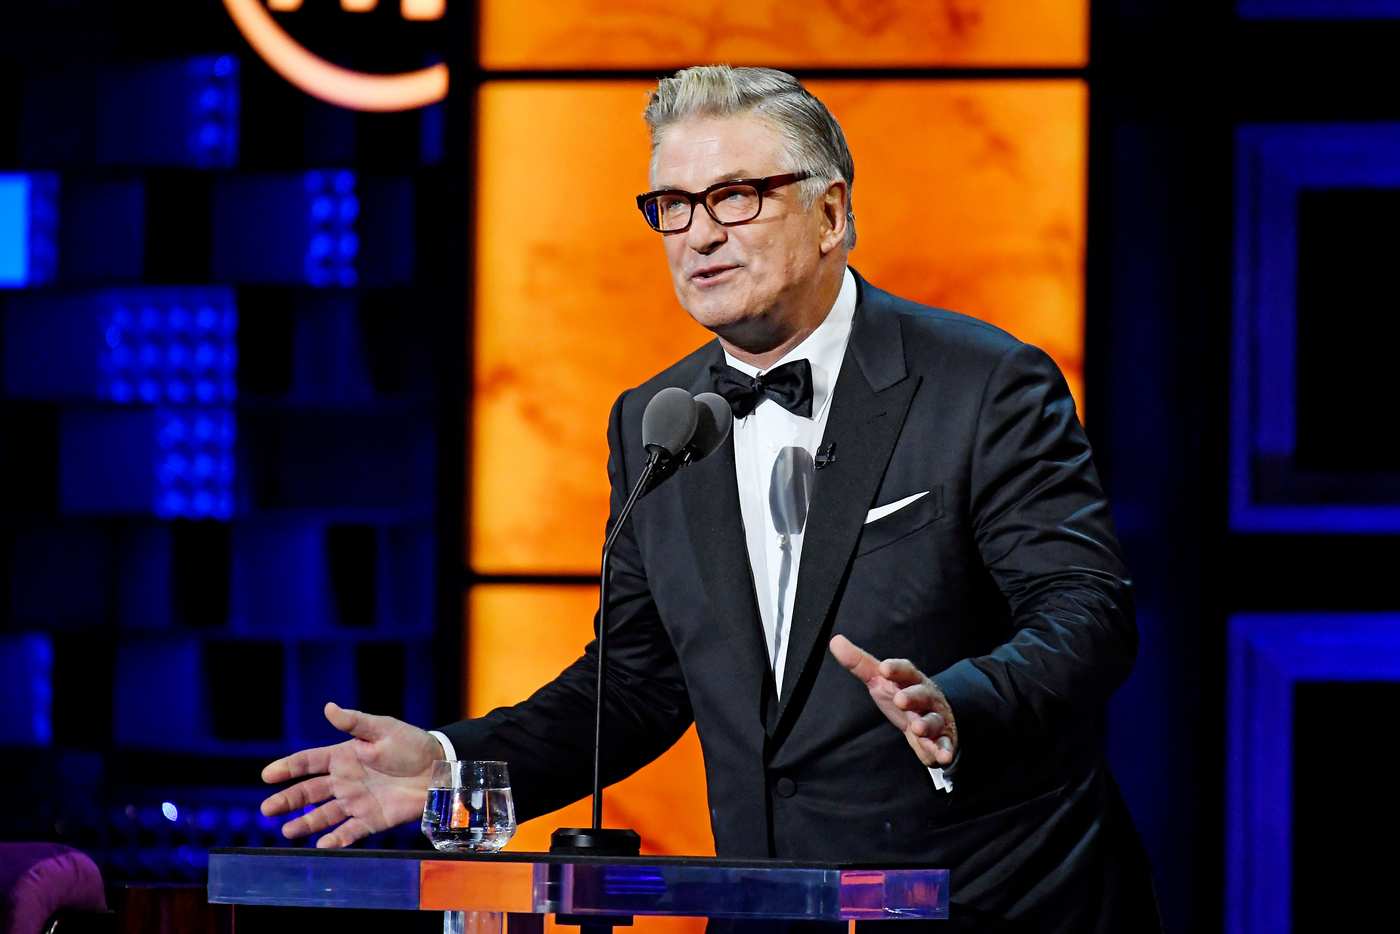 The Best Burns from the Alec Baldwin Comedy Central Roast